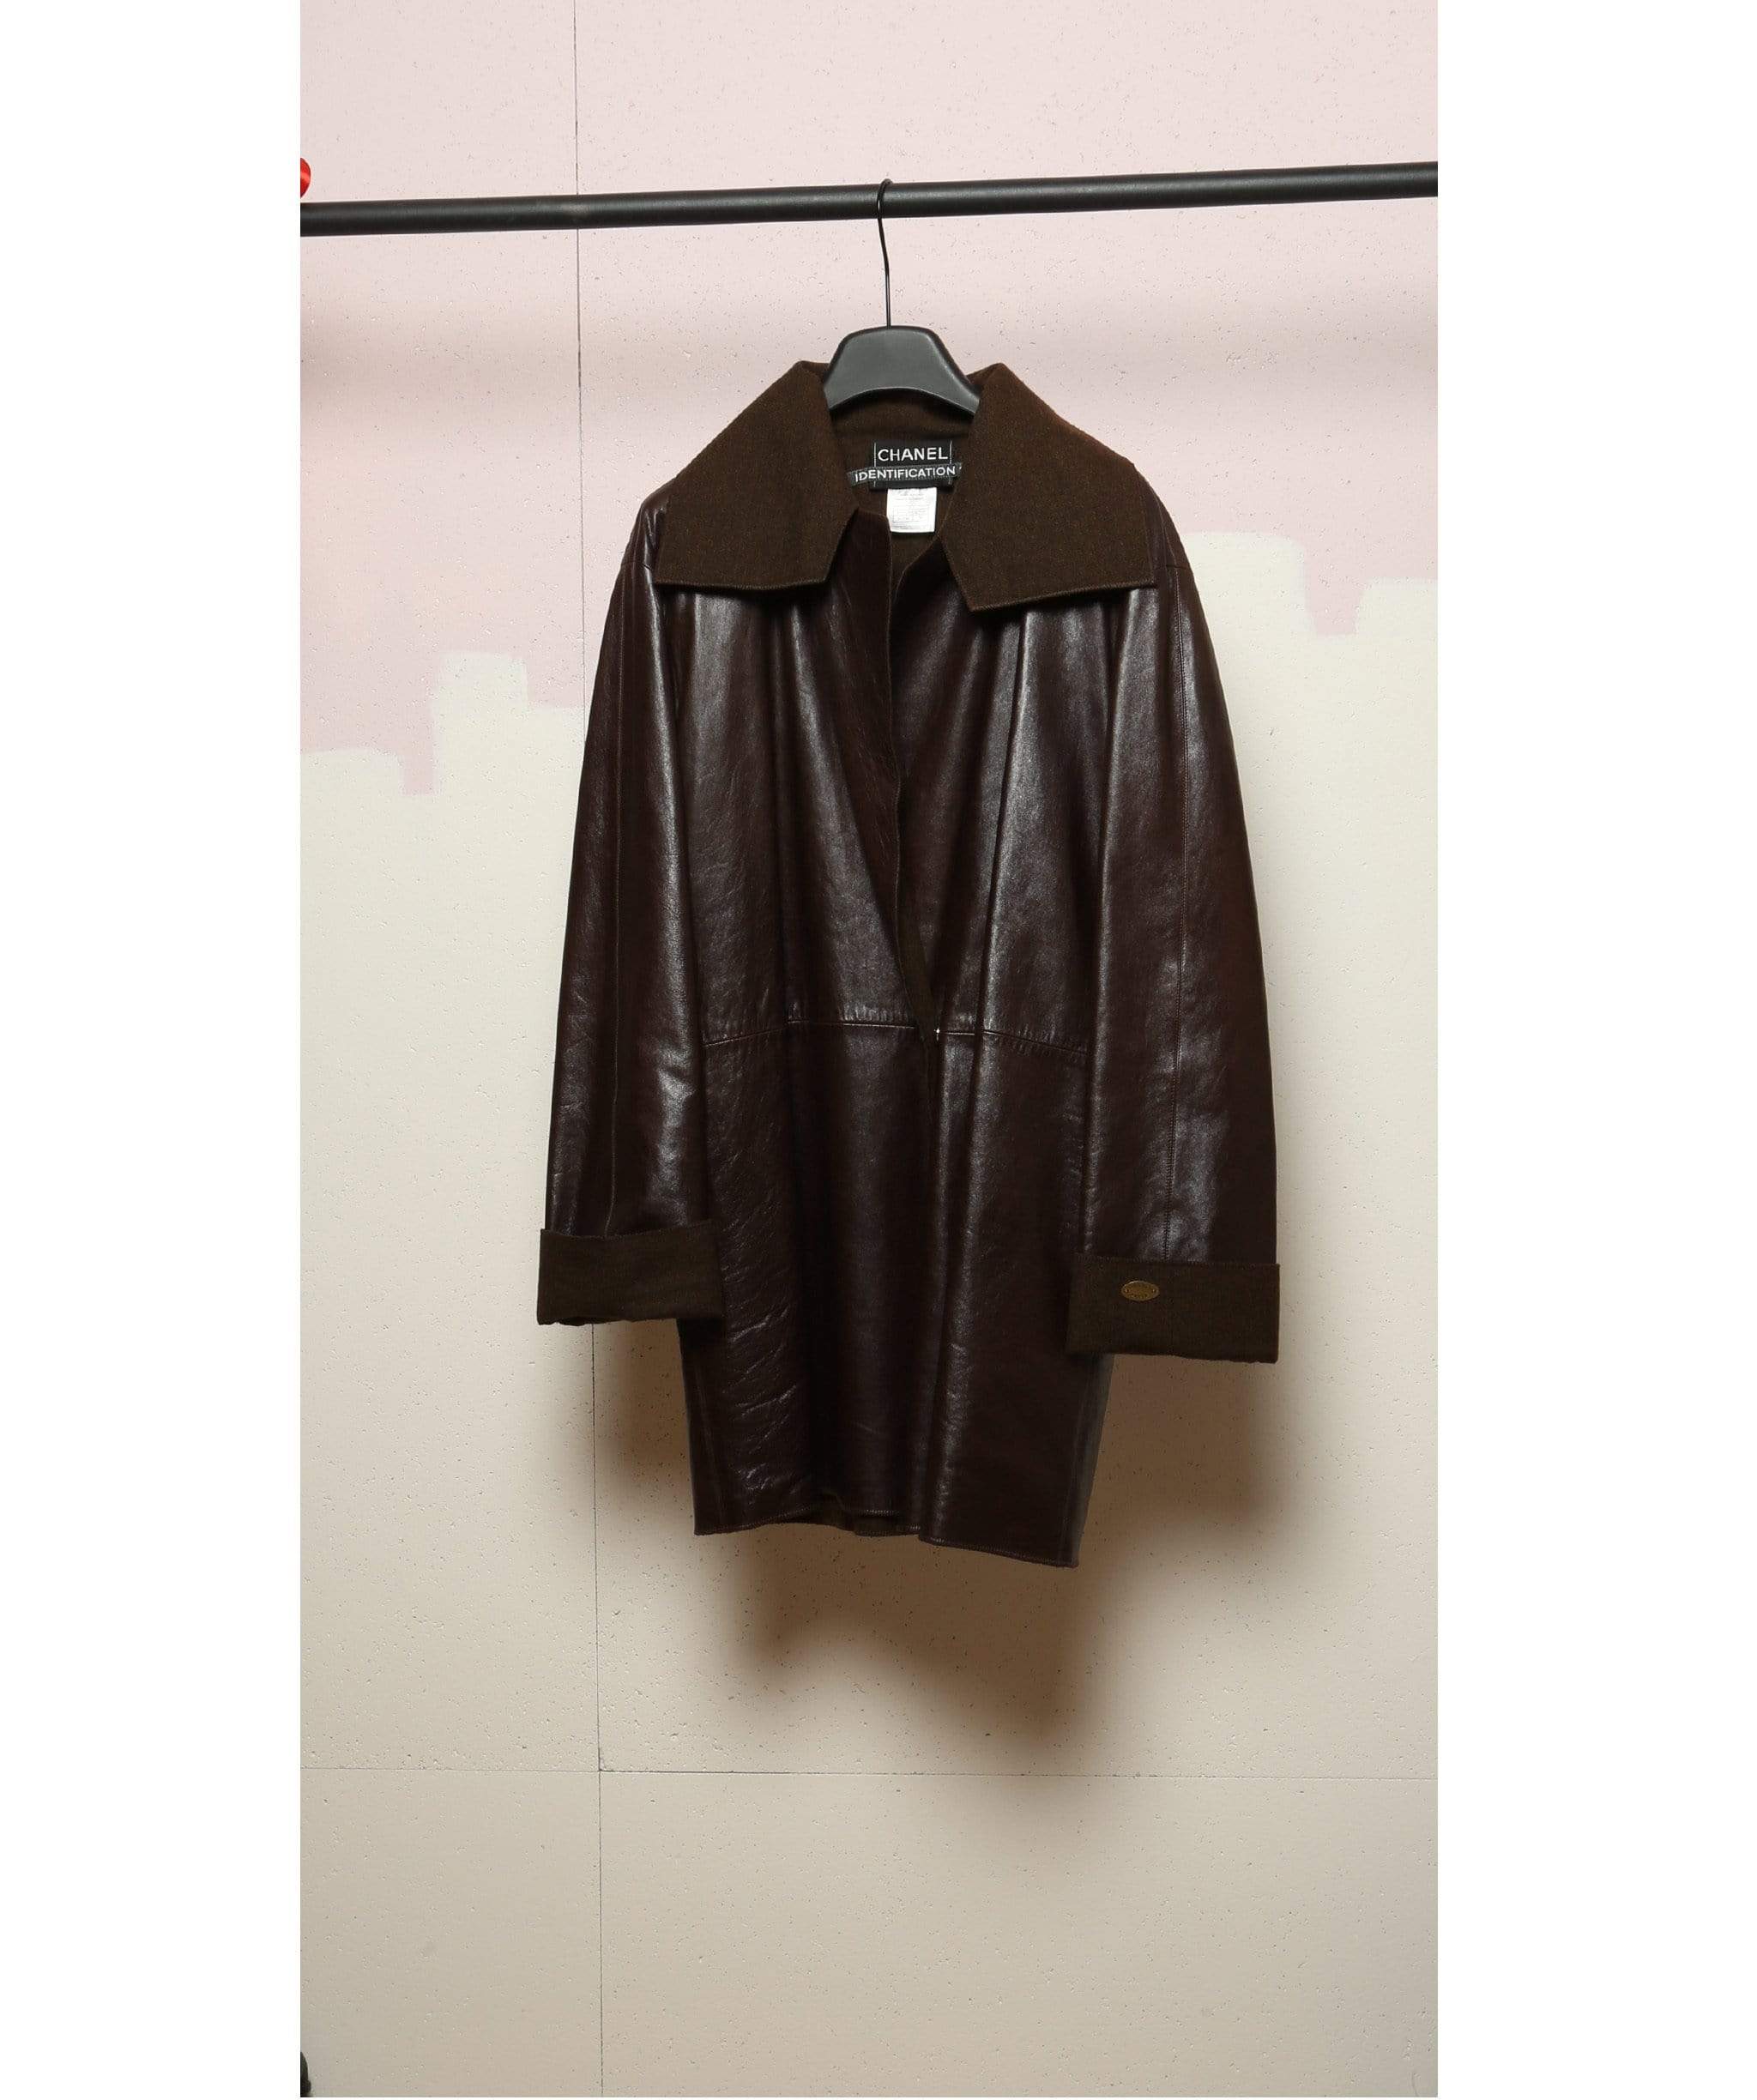 Chanel Chanel Brown leather jacket size 8